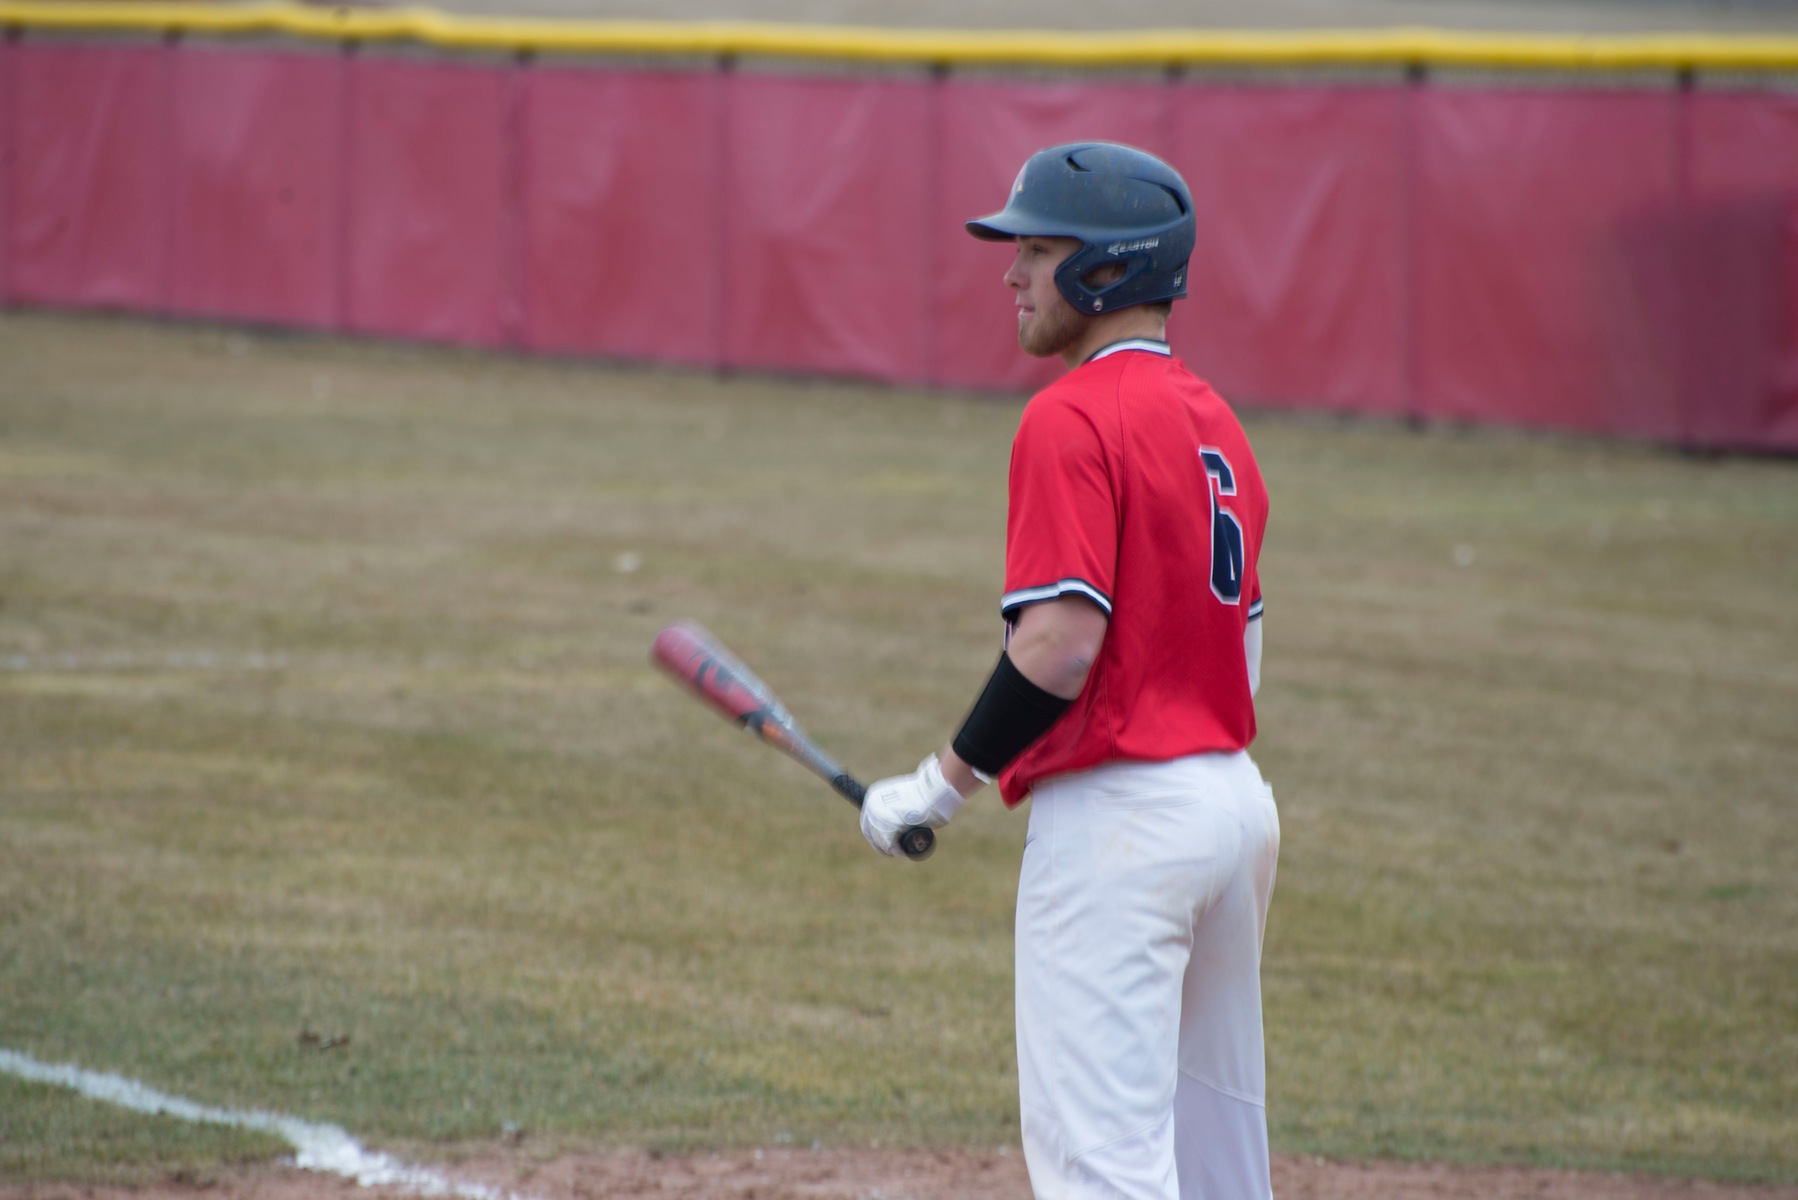 Cards claim weekend series with 19-7 victory over McKendree